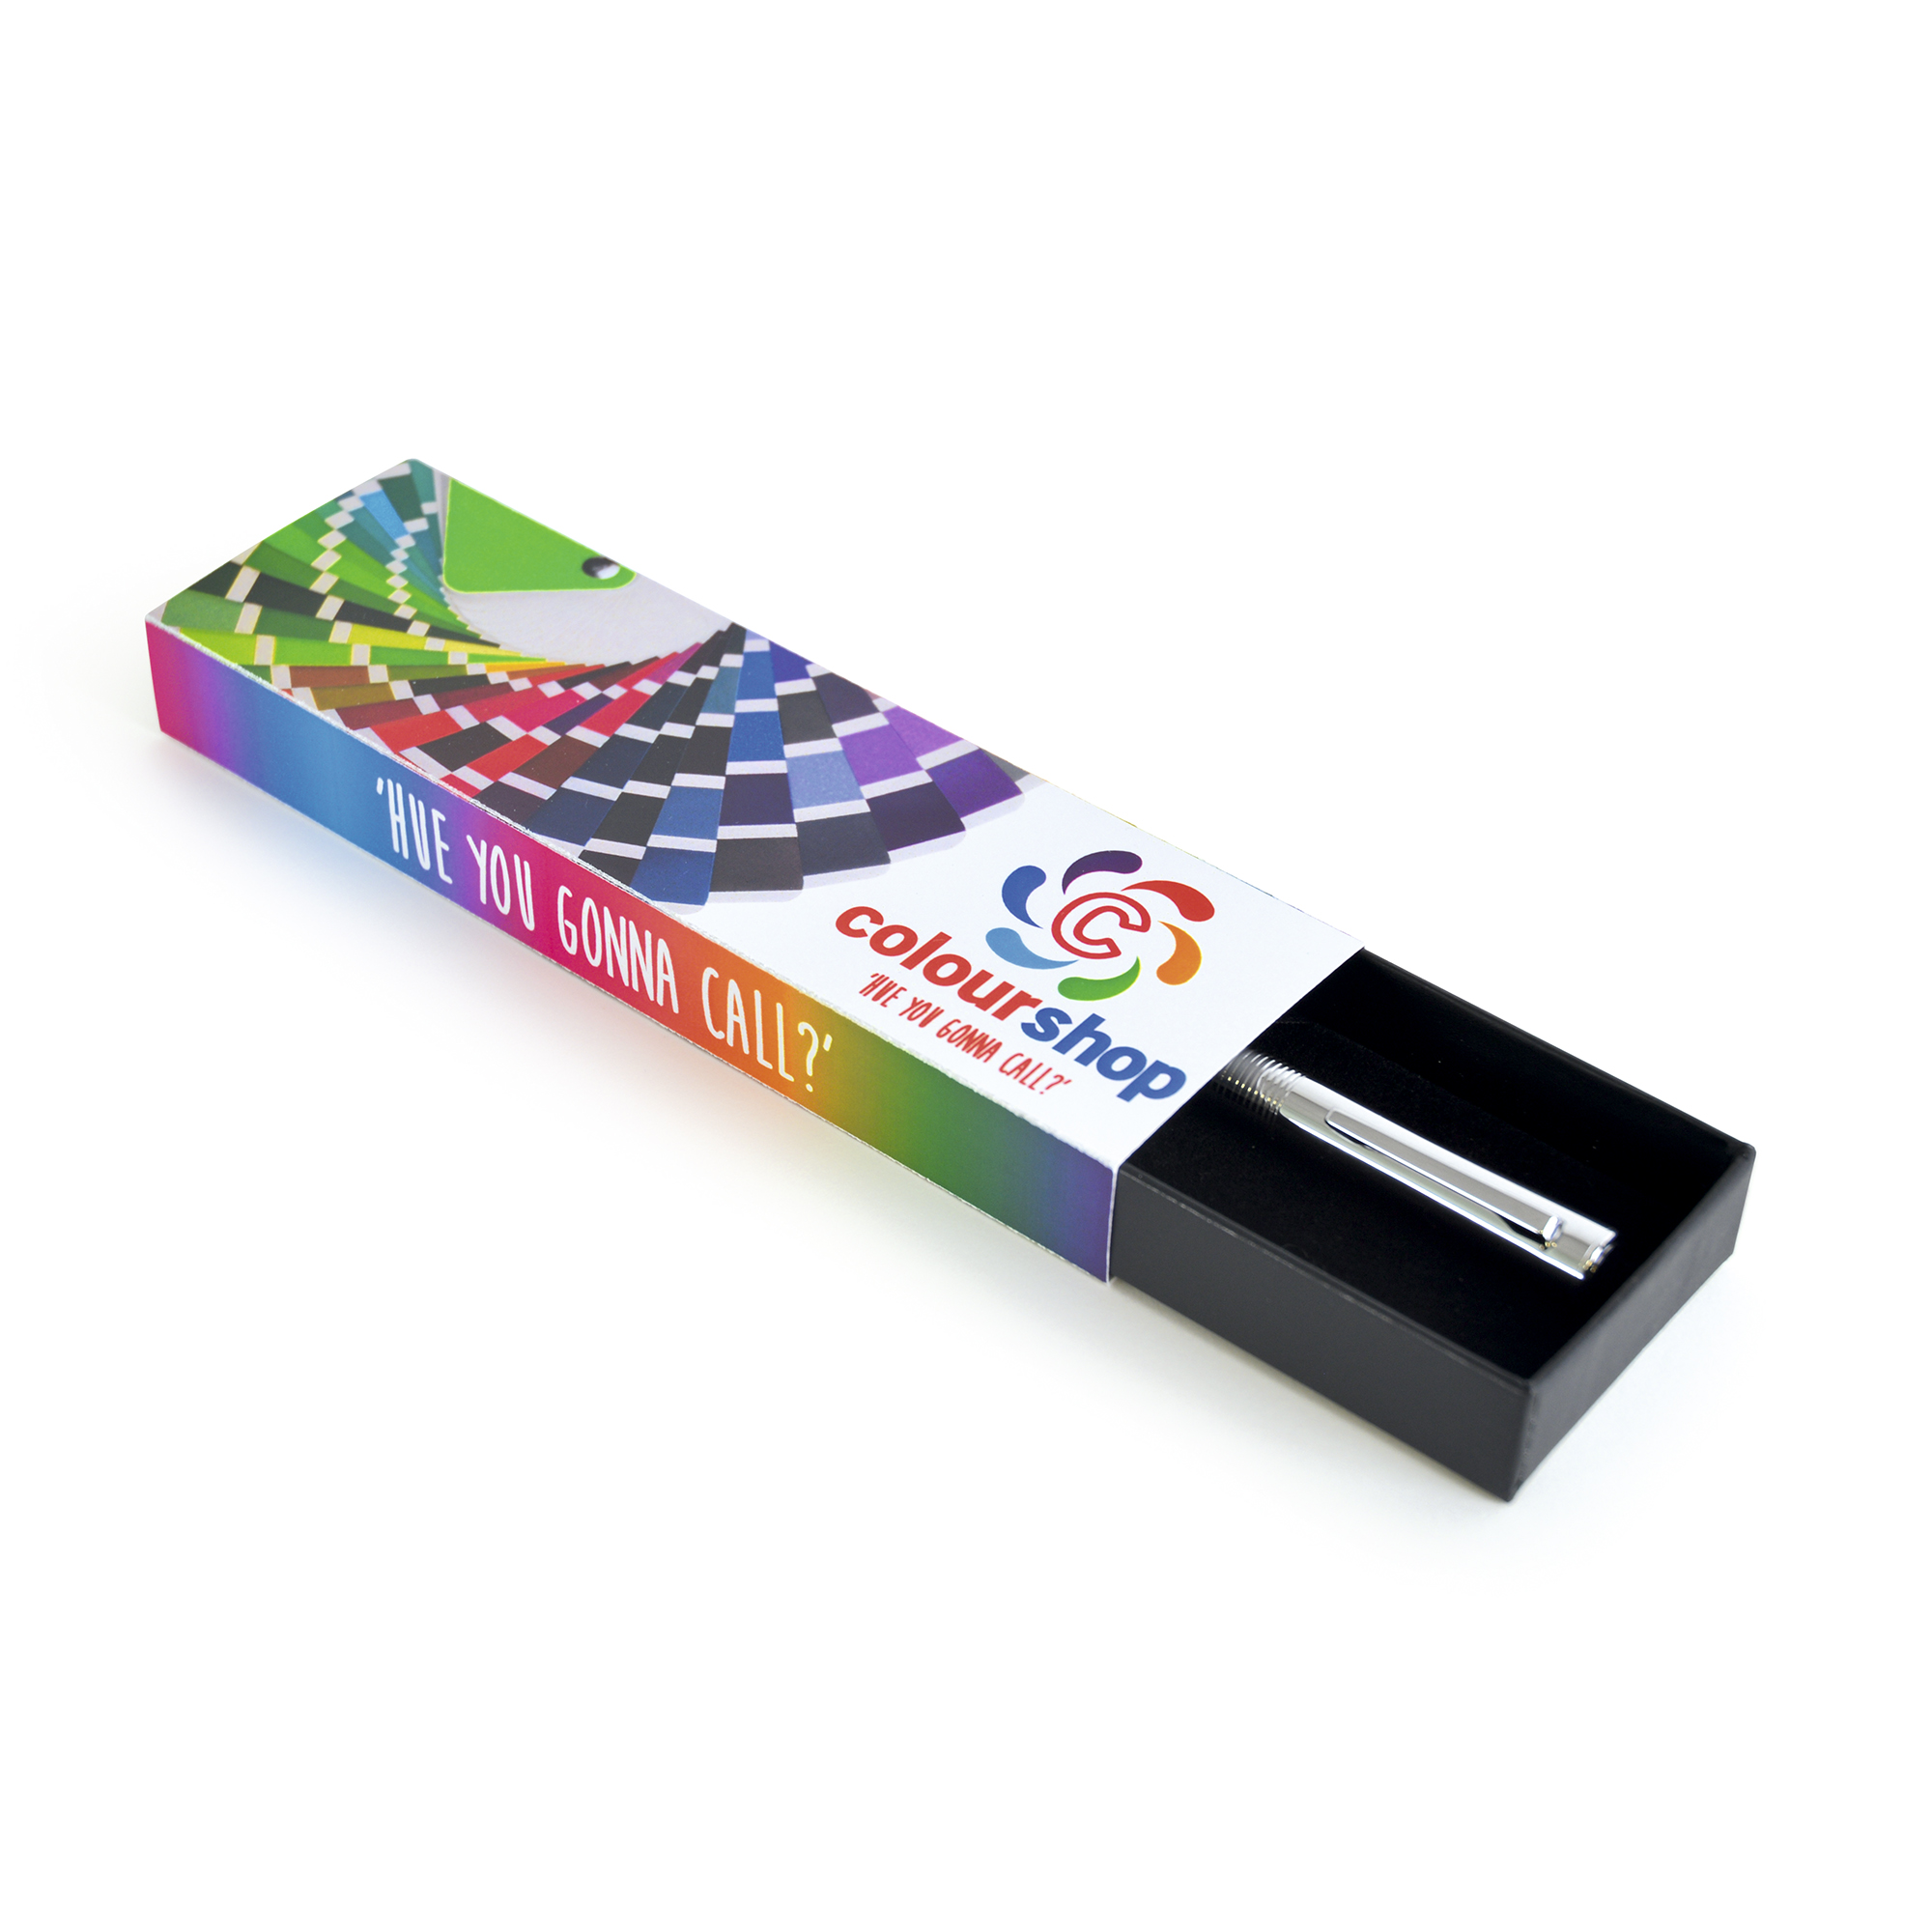 The vision gift box with card sleeve printed full colour process all over from only 100 pieces